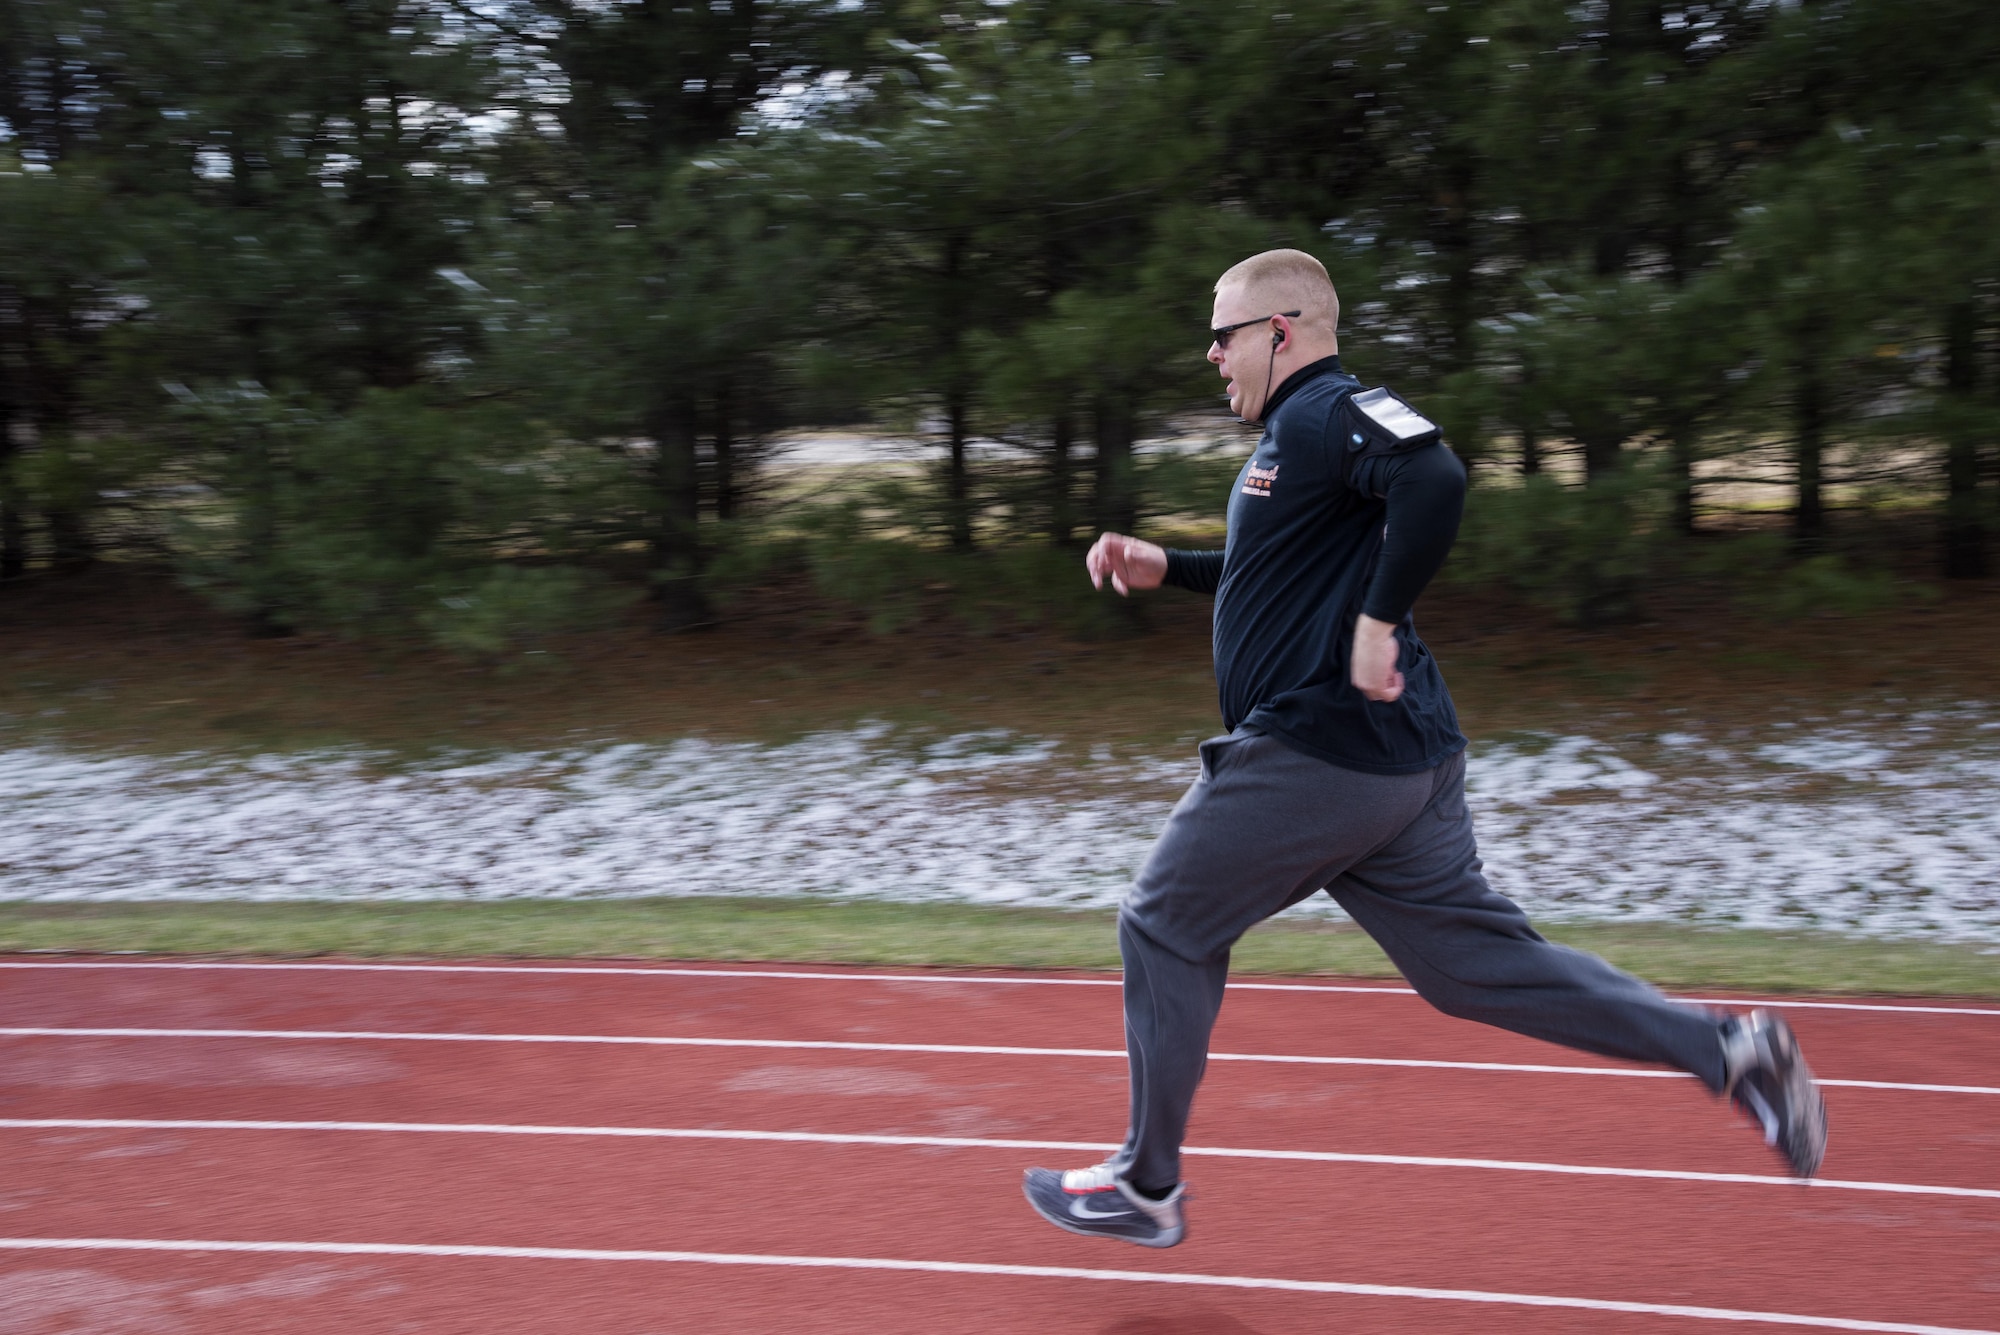 Master Sgt. Estil Fields, 436th Maintenance Group self-assessment program manager, completes a lap on the track during a 90 Plus class Jan. 30, 2017, at Dover Air Force Base, Del. The fitness center hosts this class at 6 a.m. and noon each Monday, Wednesday and Friday. (U.S. Air Force photo by Senior Airman Aaron J. Jenne)